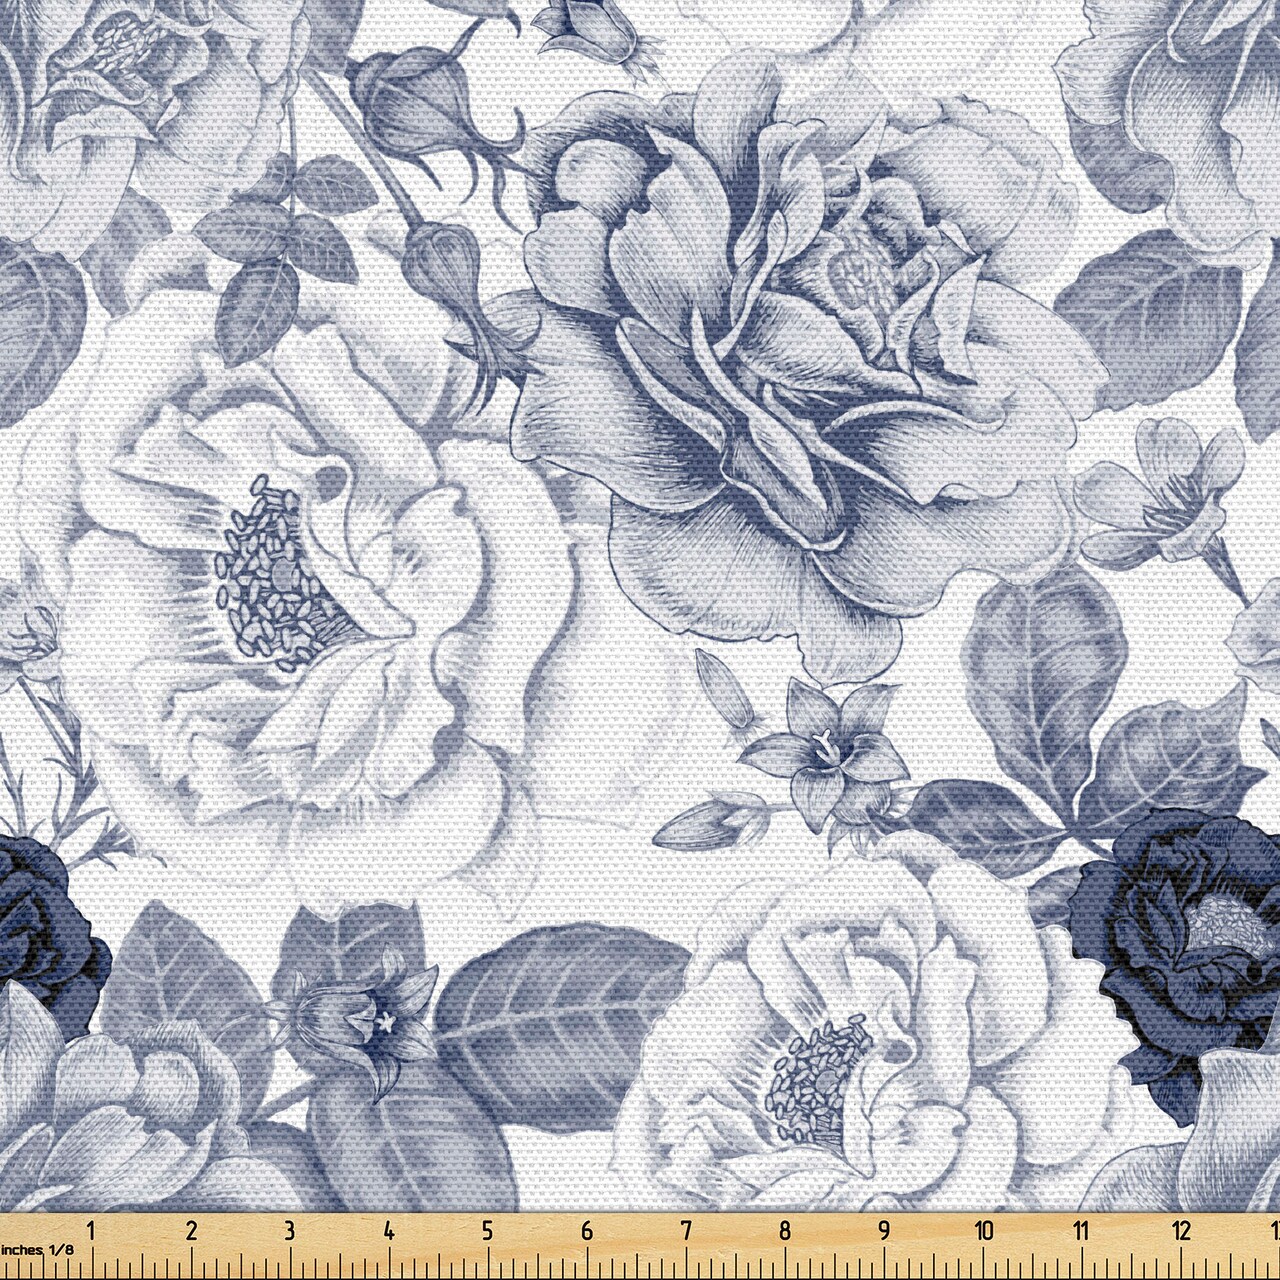 Ambesonne Shabby Flora Fabric by The Yard, Garden Spring Roses Buds with Leaves Flowers Romantic Image Art, Decorative Fabric for Upholstery and Home Accents, 10 Yards, Cadet Blue